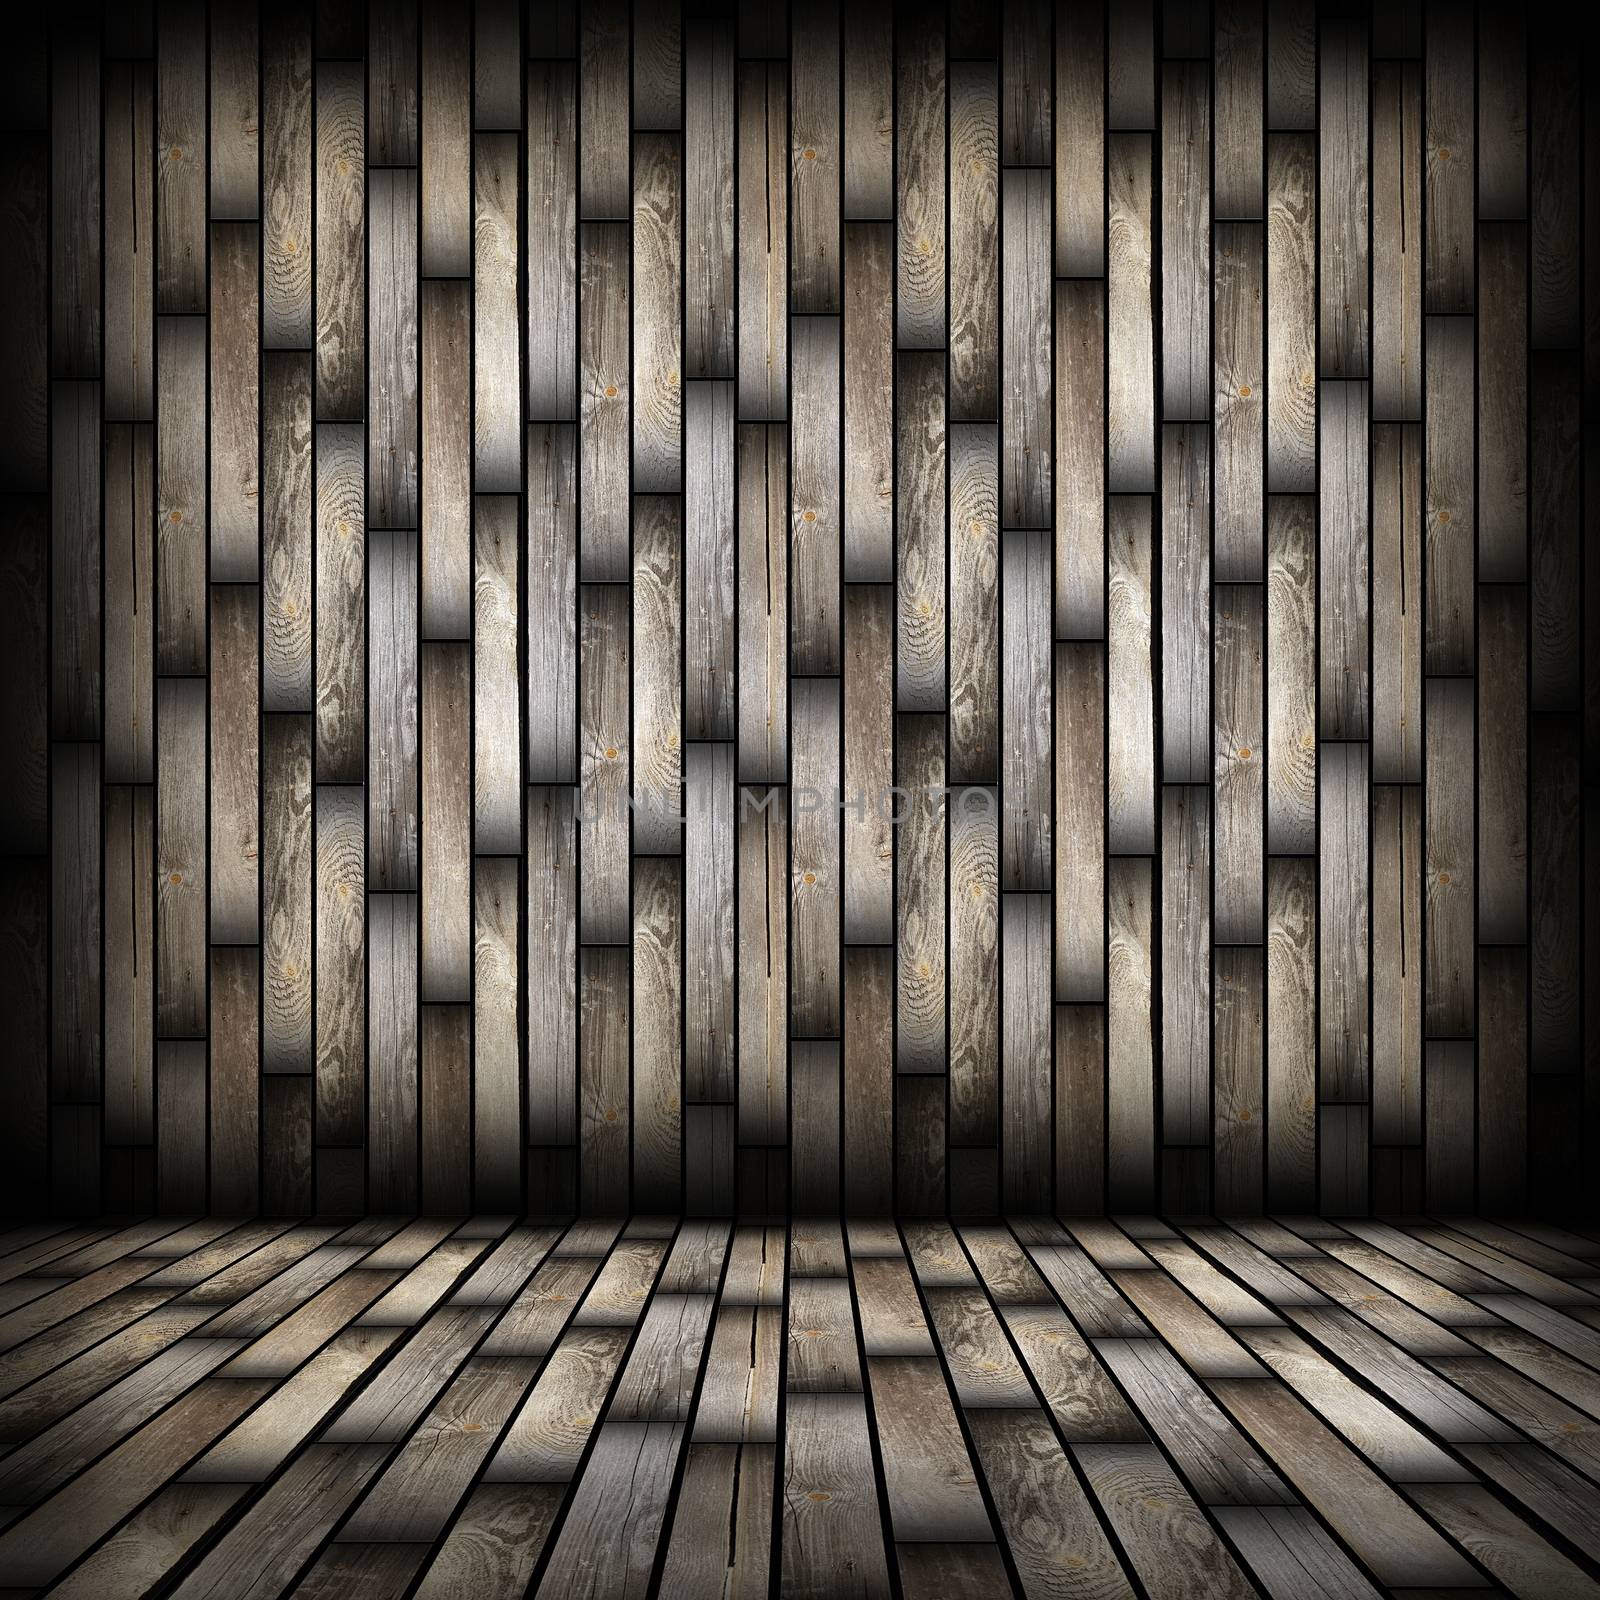 dark wood planks finishing on interior backdrop, architectural room background for your design with wooden floor and wall